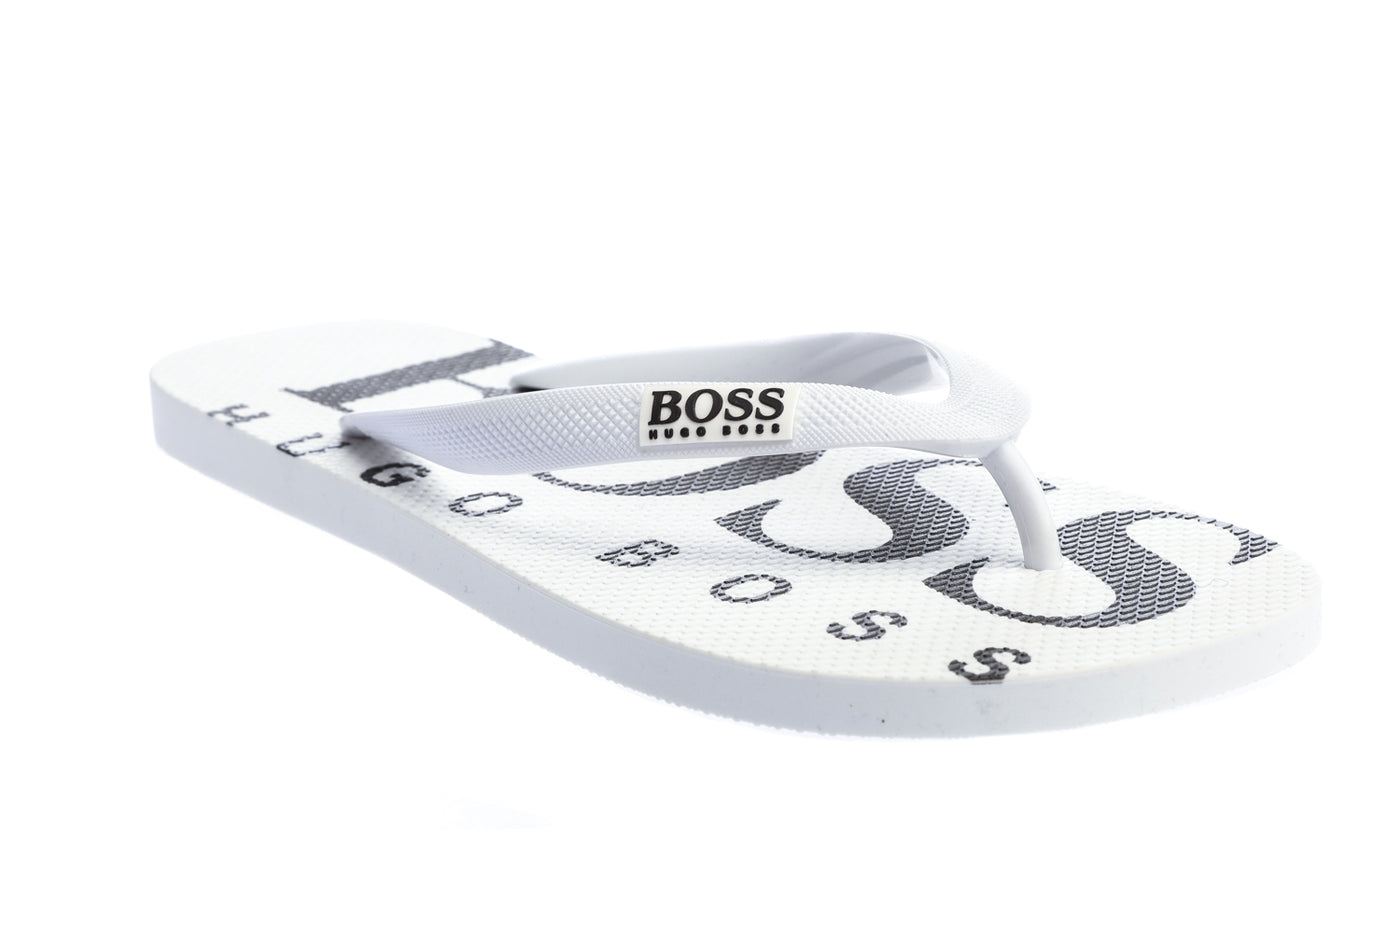 BOSS Wave Thong Flip Flop in White & Black